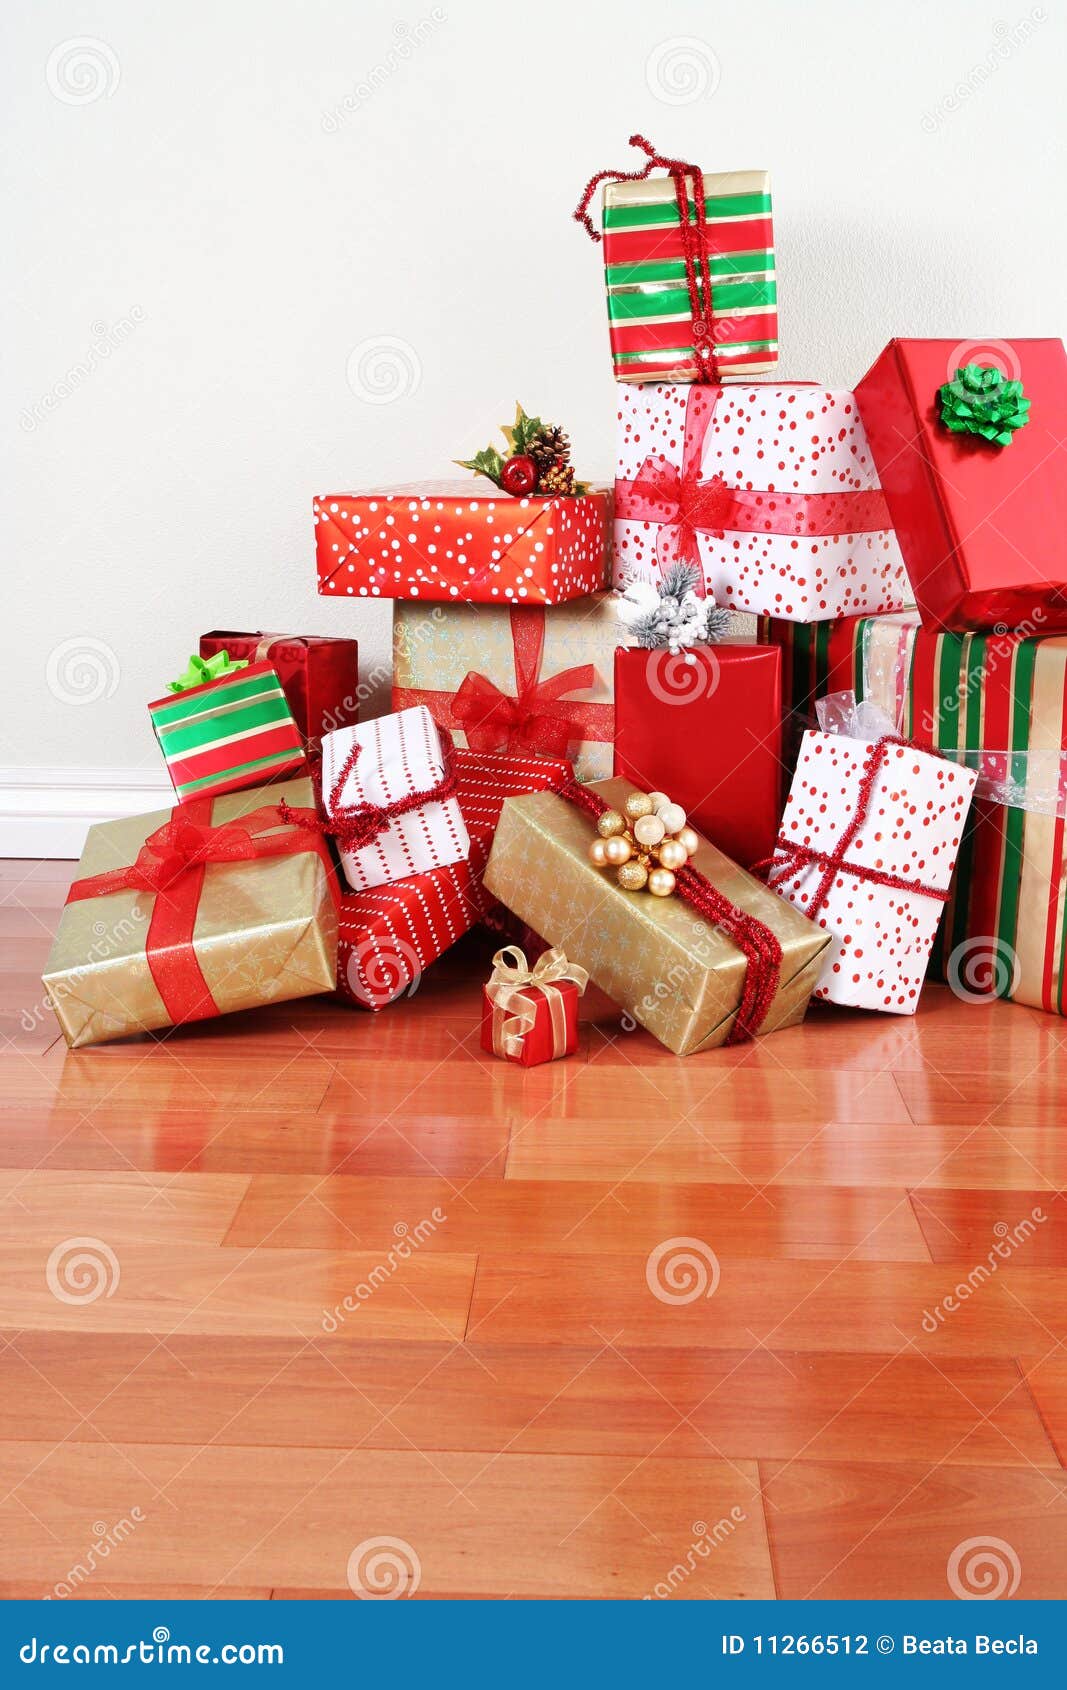 Gift pile on a floor stock photo. Image of many, decoration 11266512